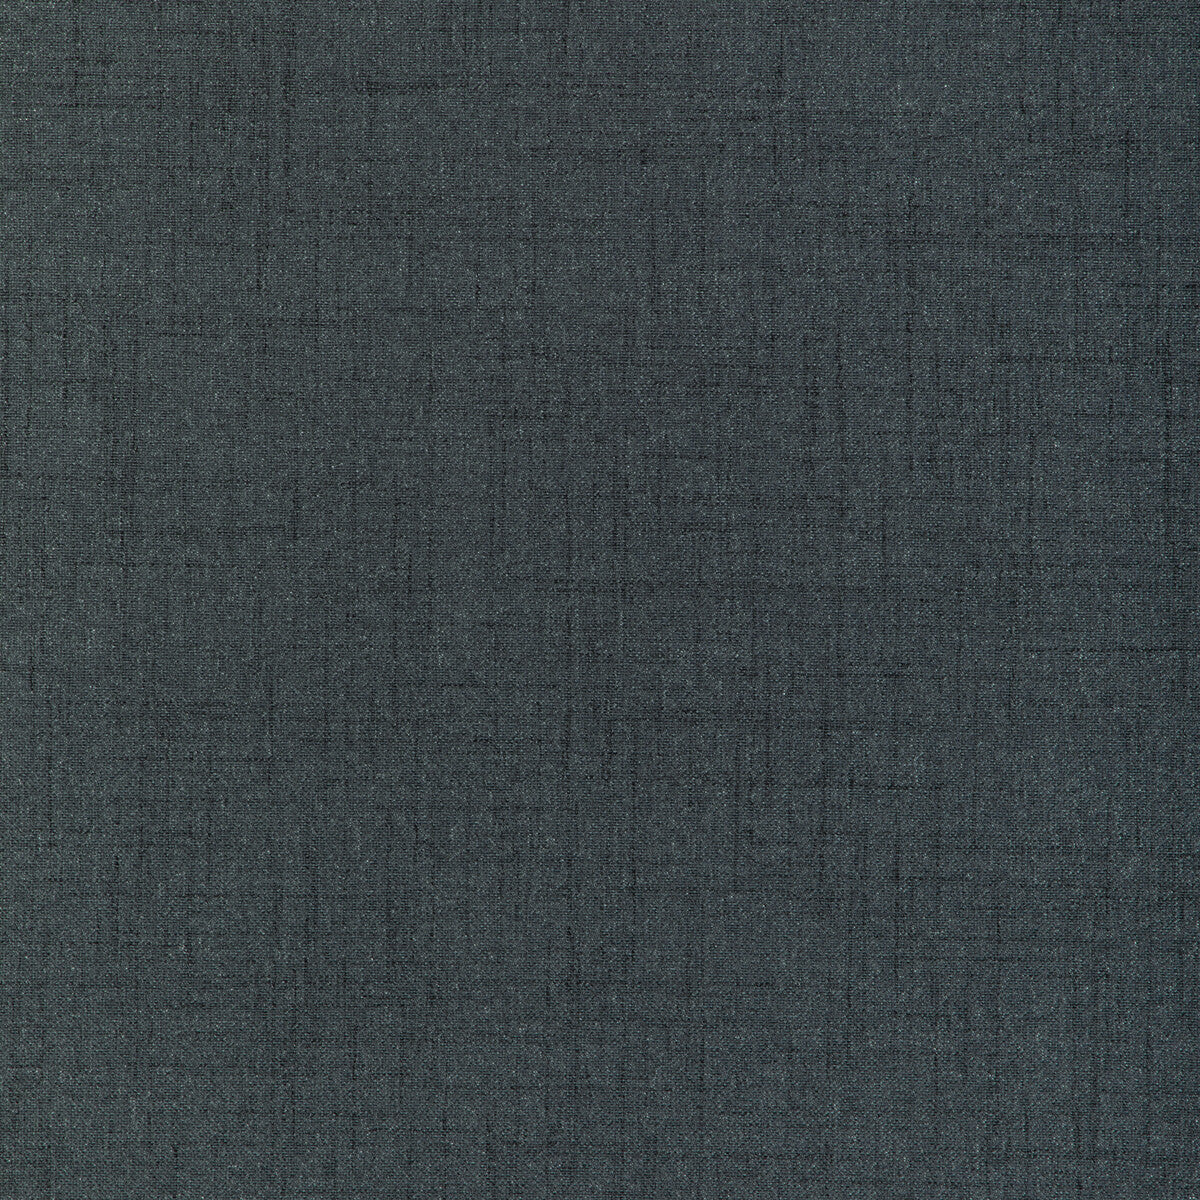 Kravet Contract fabric in 90016-21 color - pattern 90016.21.0 - by Kravet Contract in the Fr Window Blackout Drapery III collection